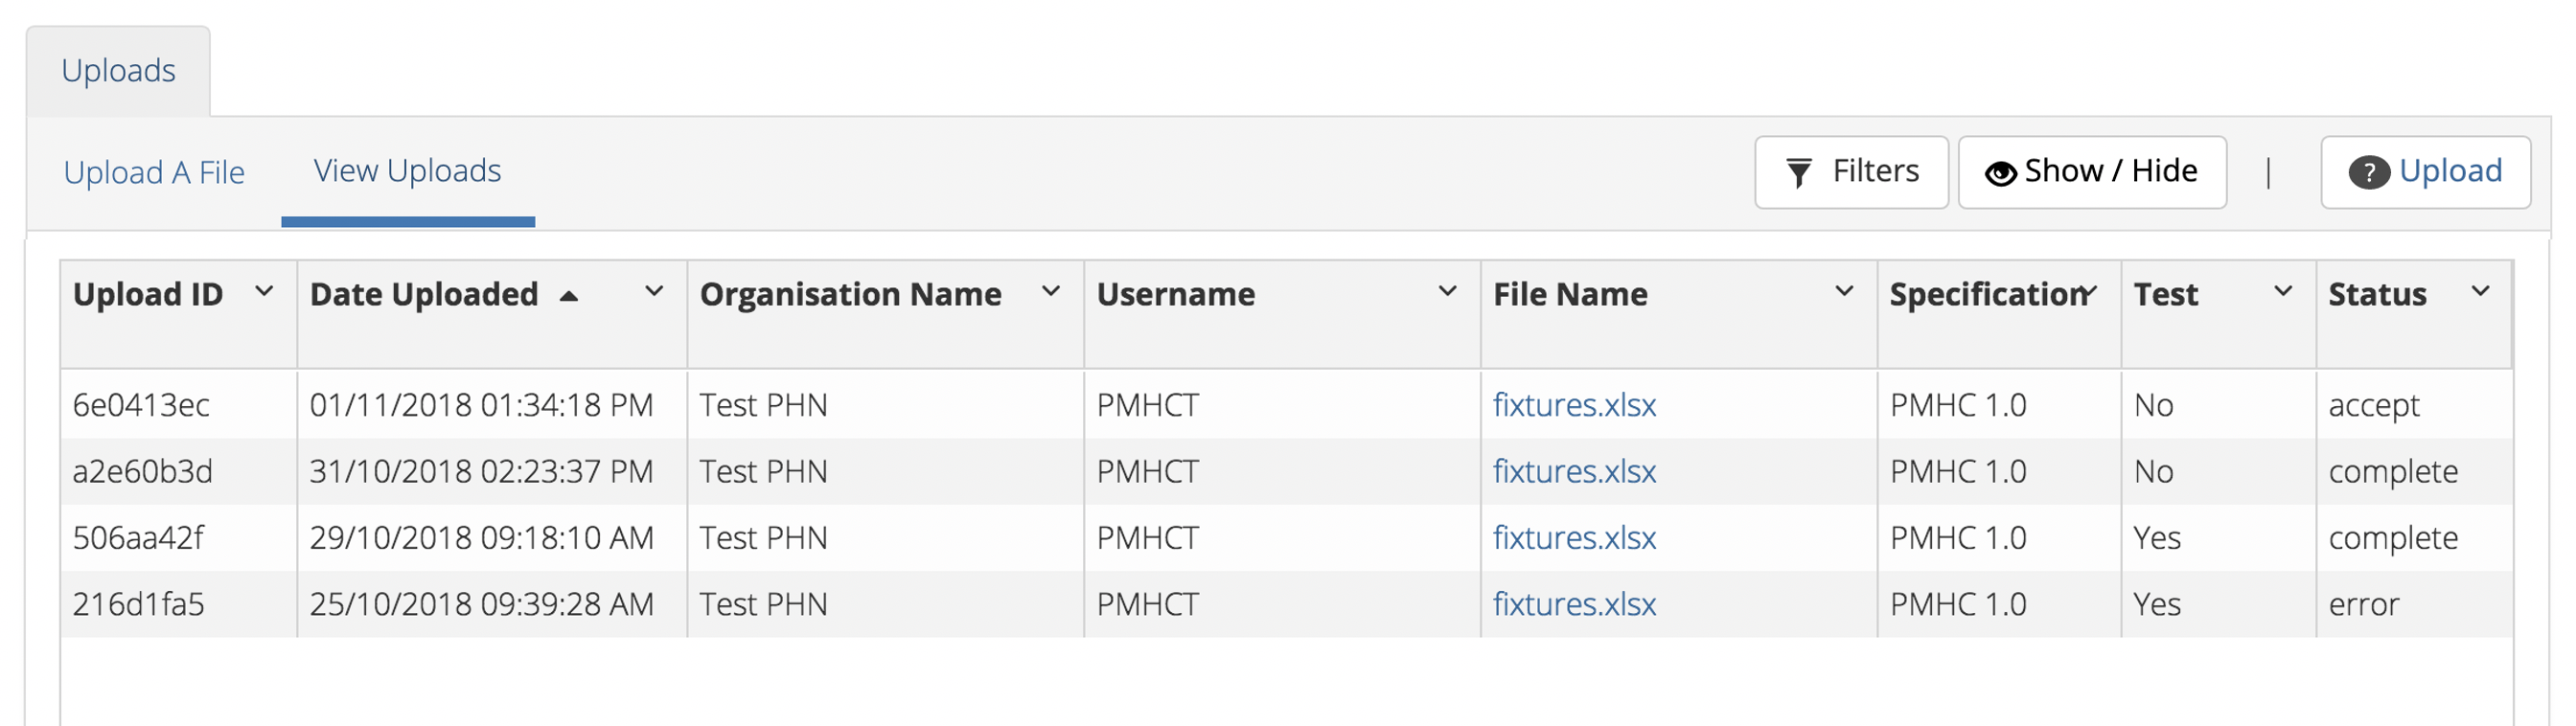 PMHC MDS Status of Previous Uploads